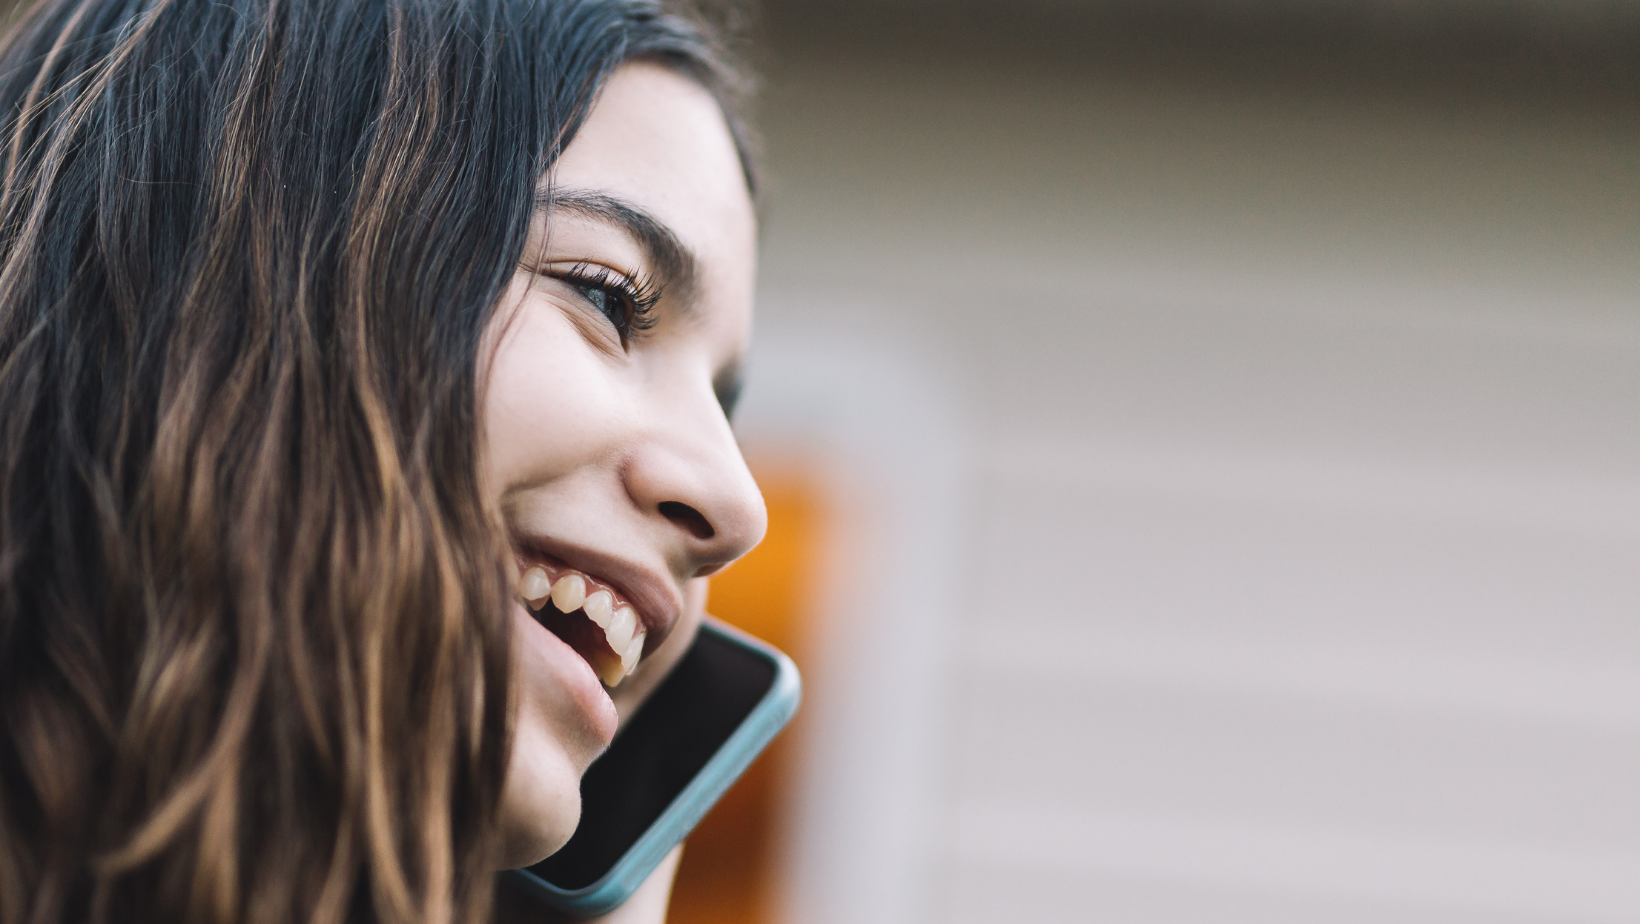 teenager smiling on the phone